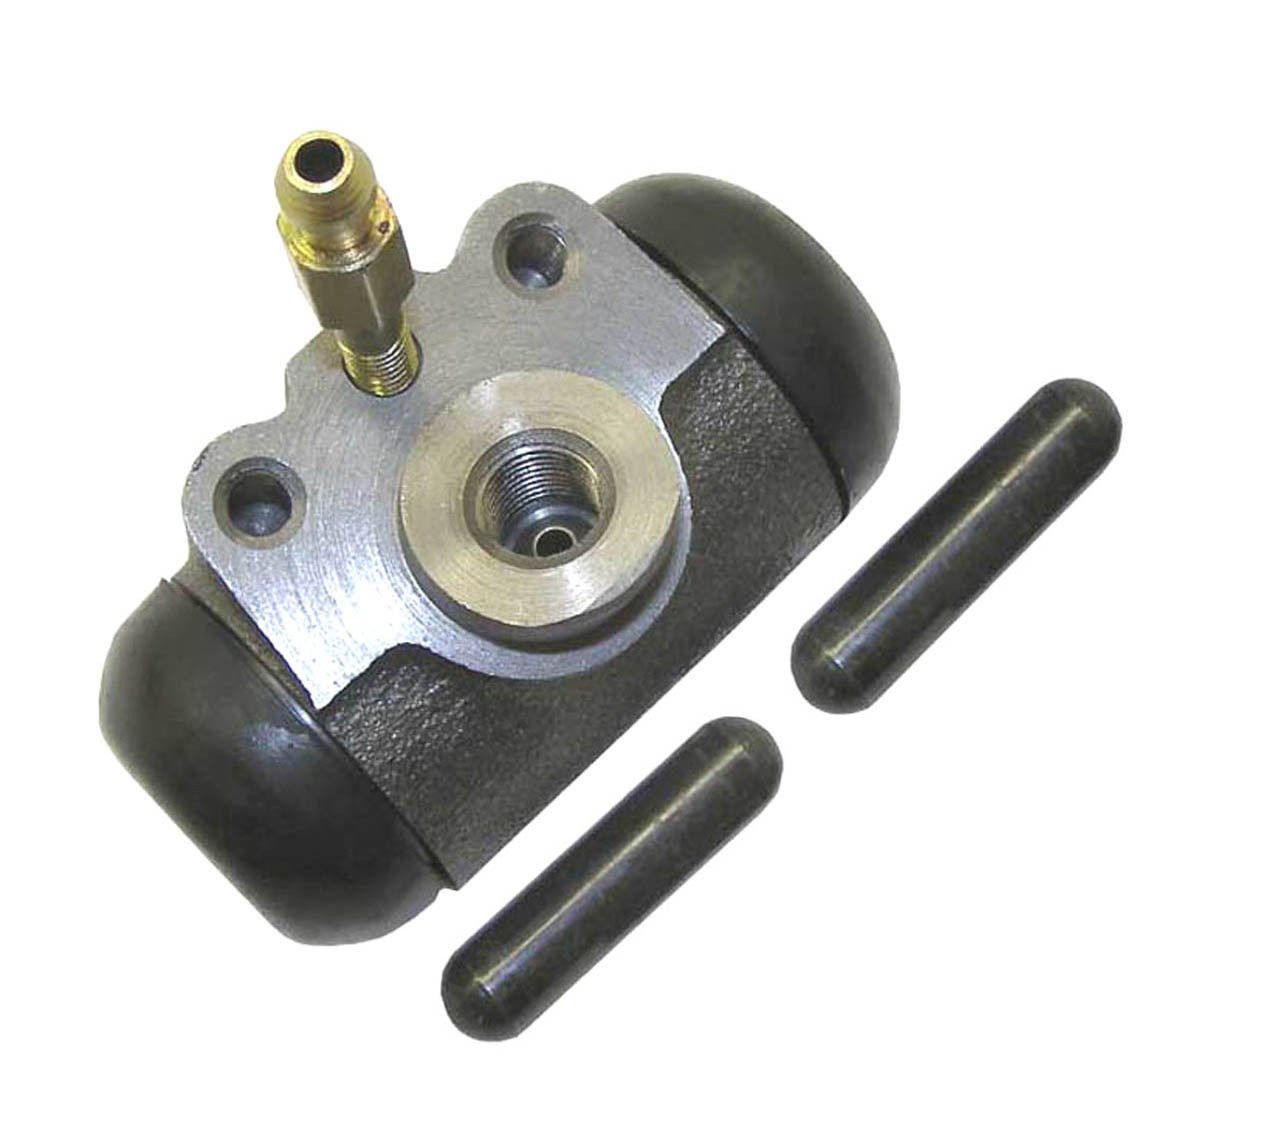 New Clark Forklift Wheel Cylinder Replacement: 910980